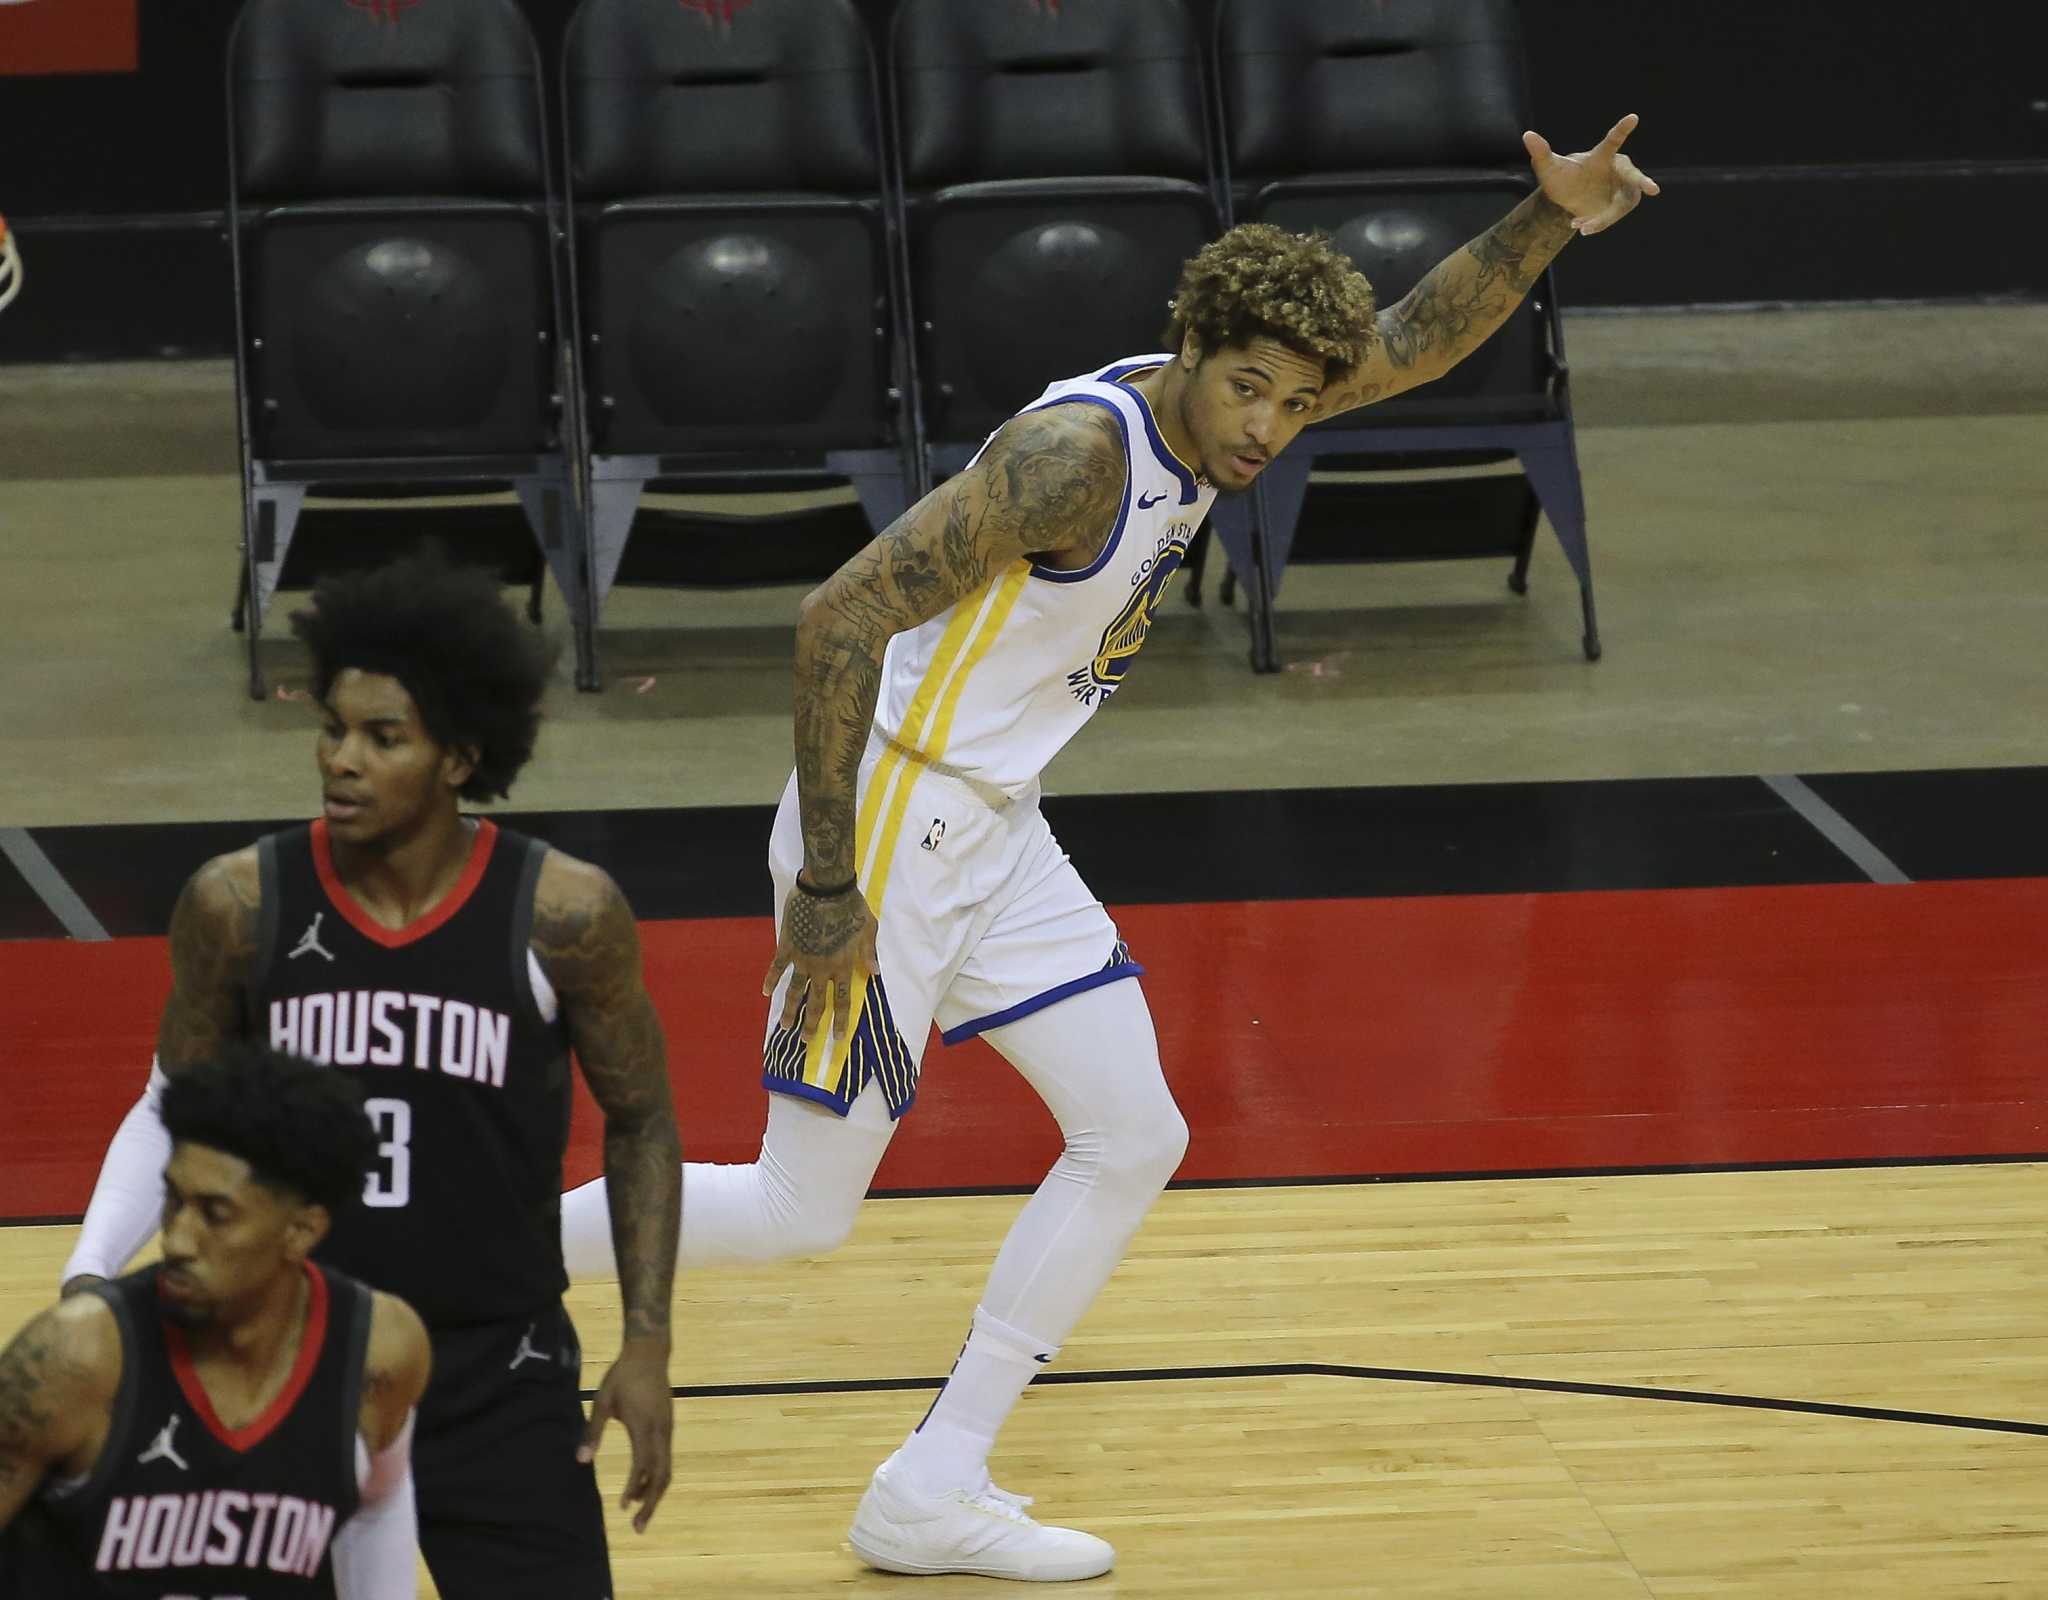 Sources: Kelly Oubre Jr., Hornets agree to 2-year, $25 million